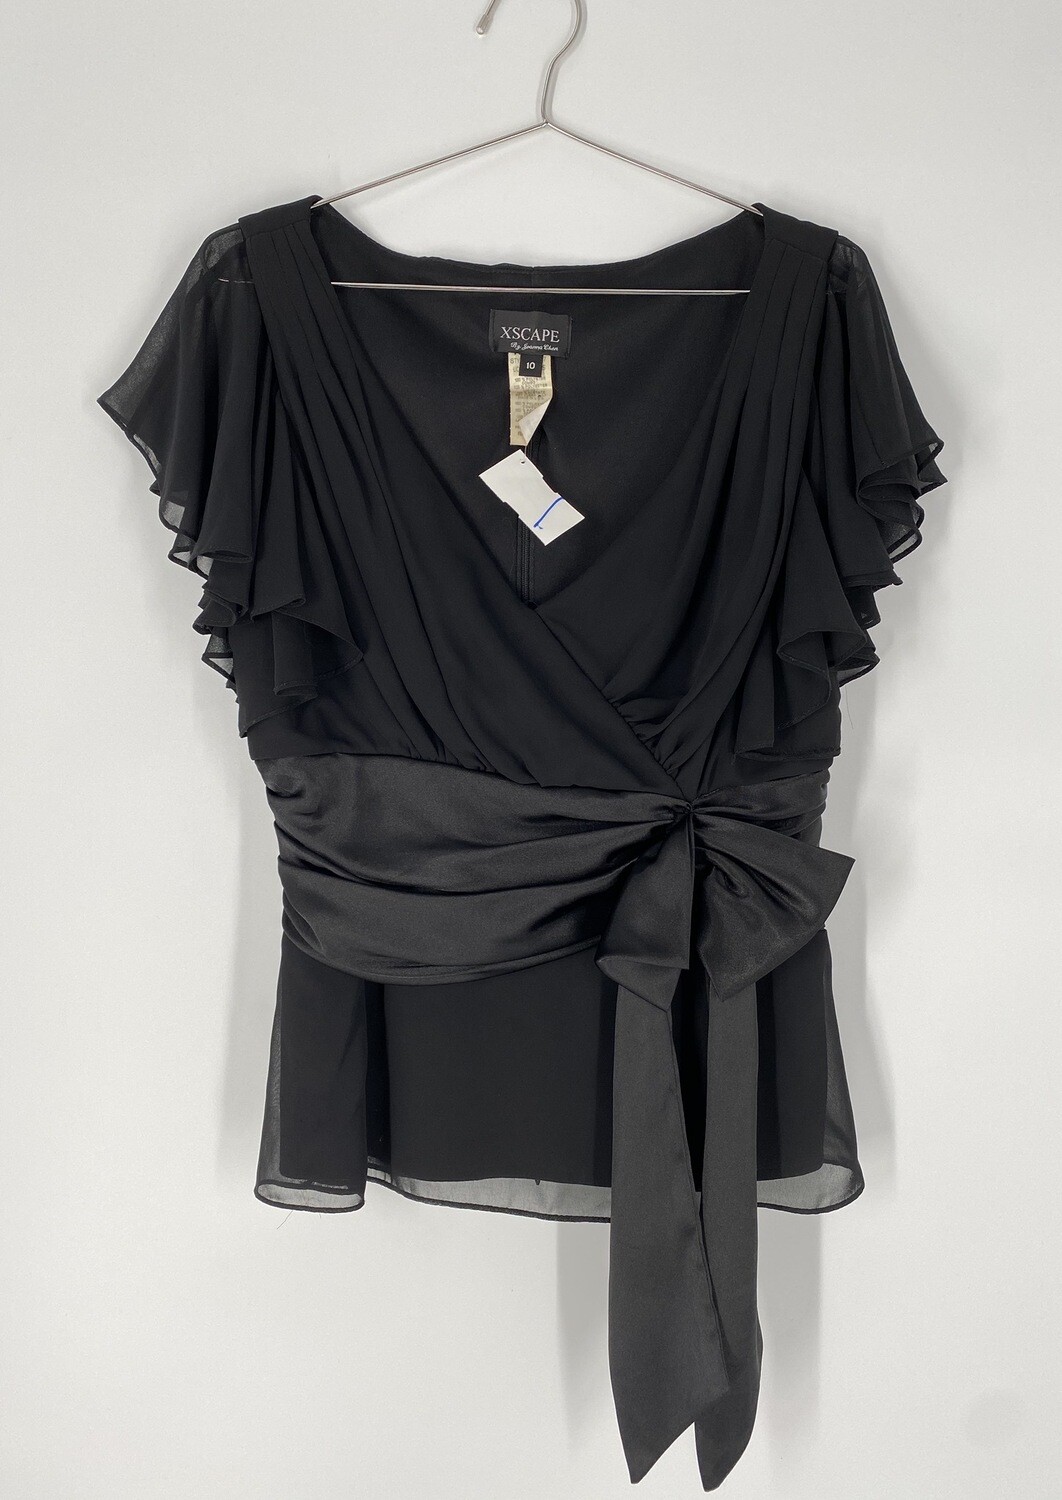 Xscape By Joanna Chen Blouse With Front-Tie Size M